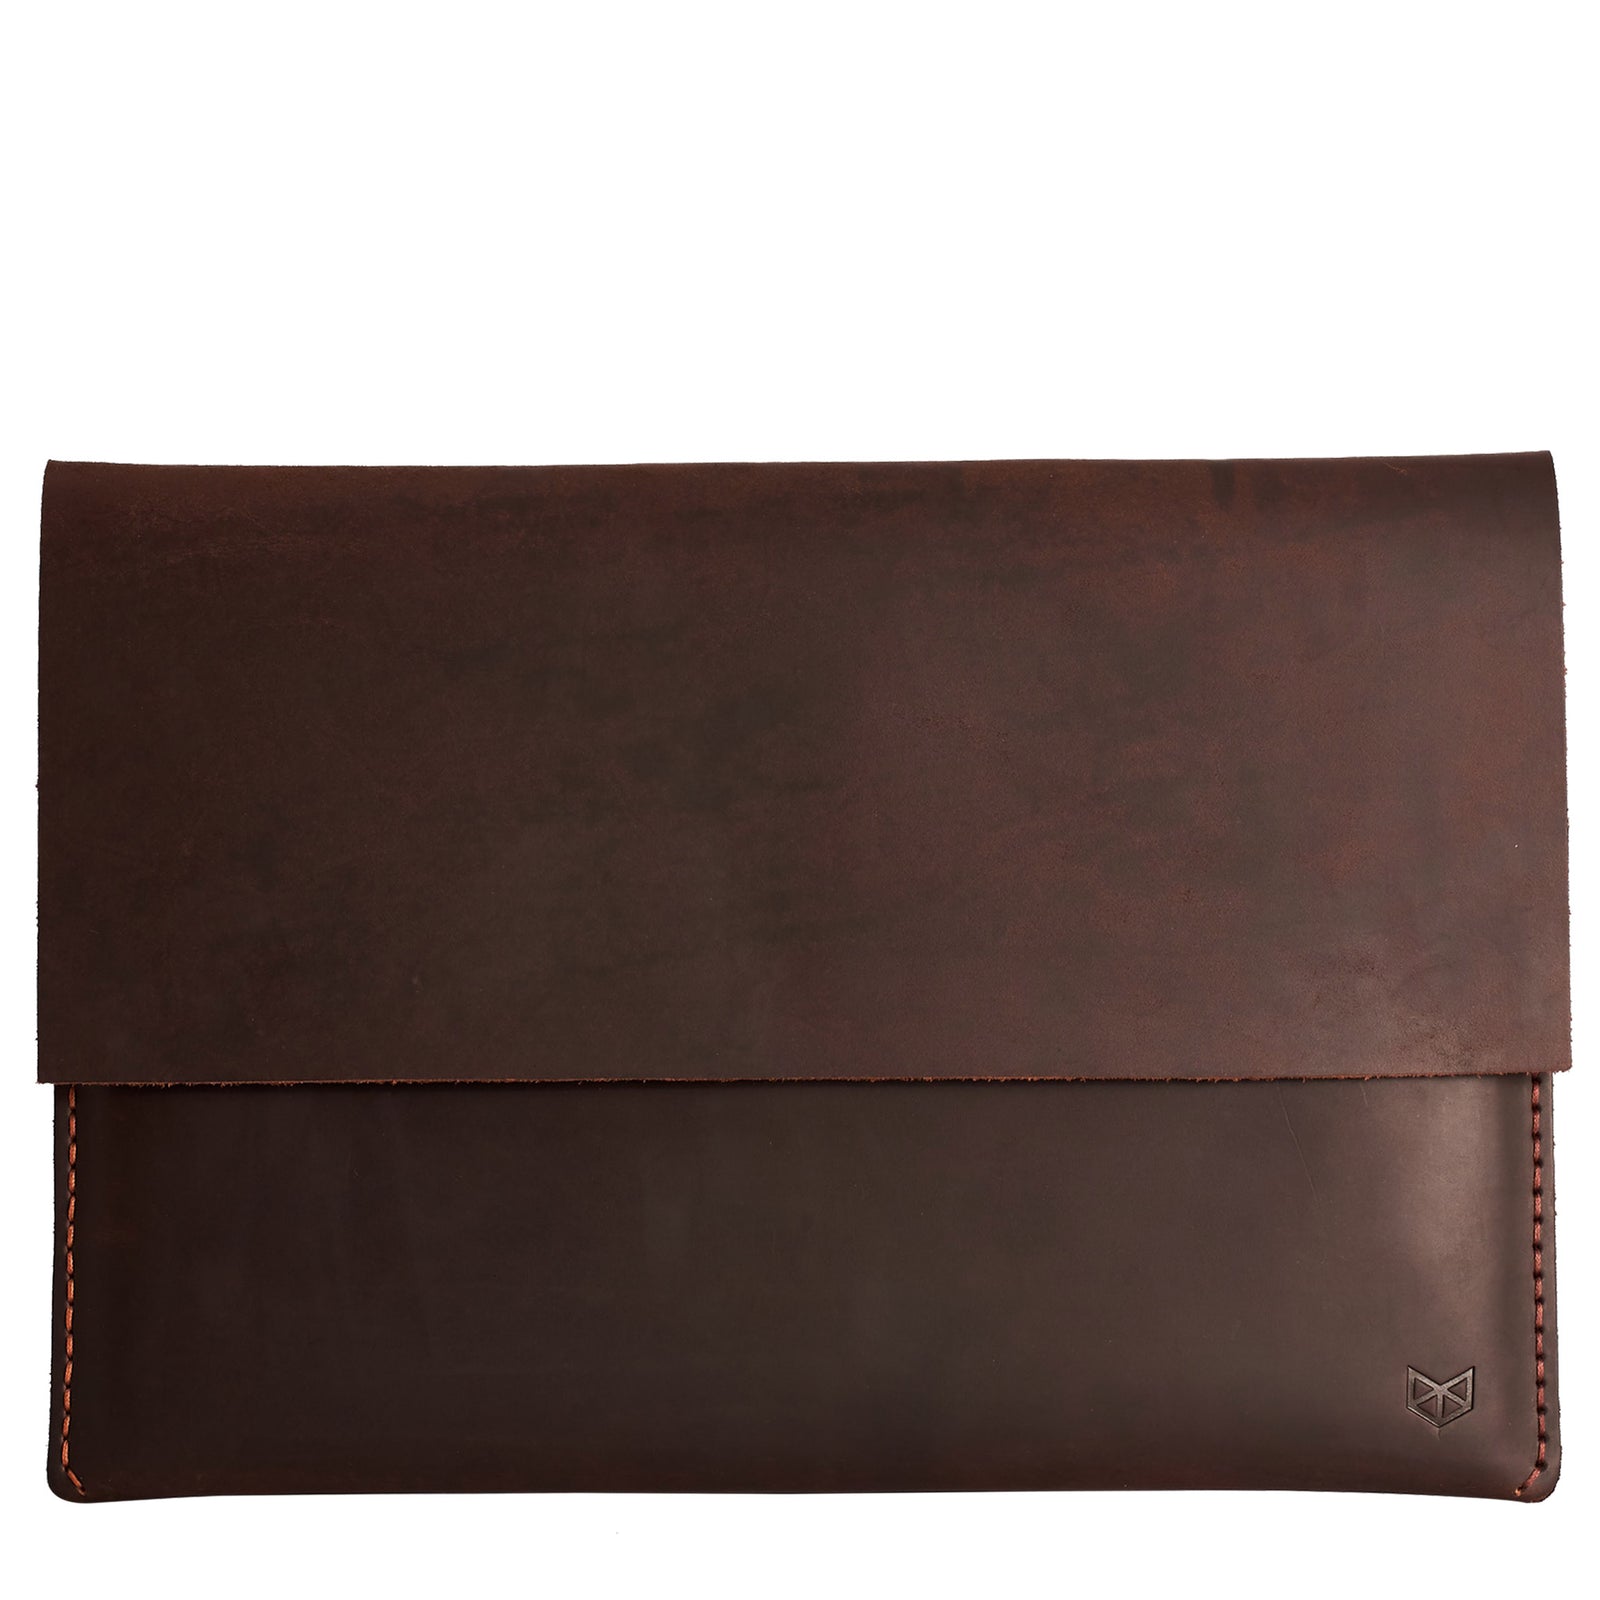 Closed dark leather case for Microsoft Surface